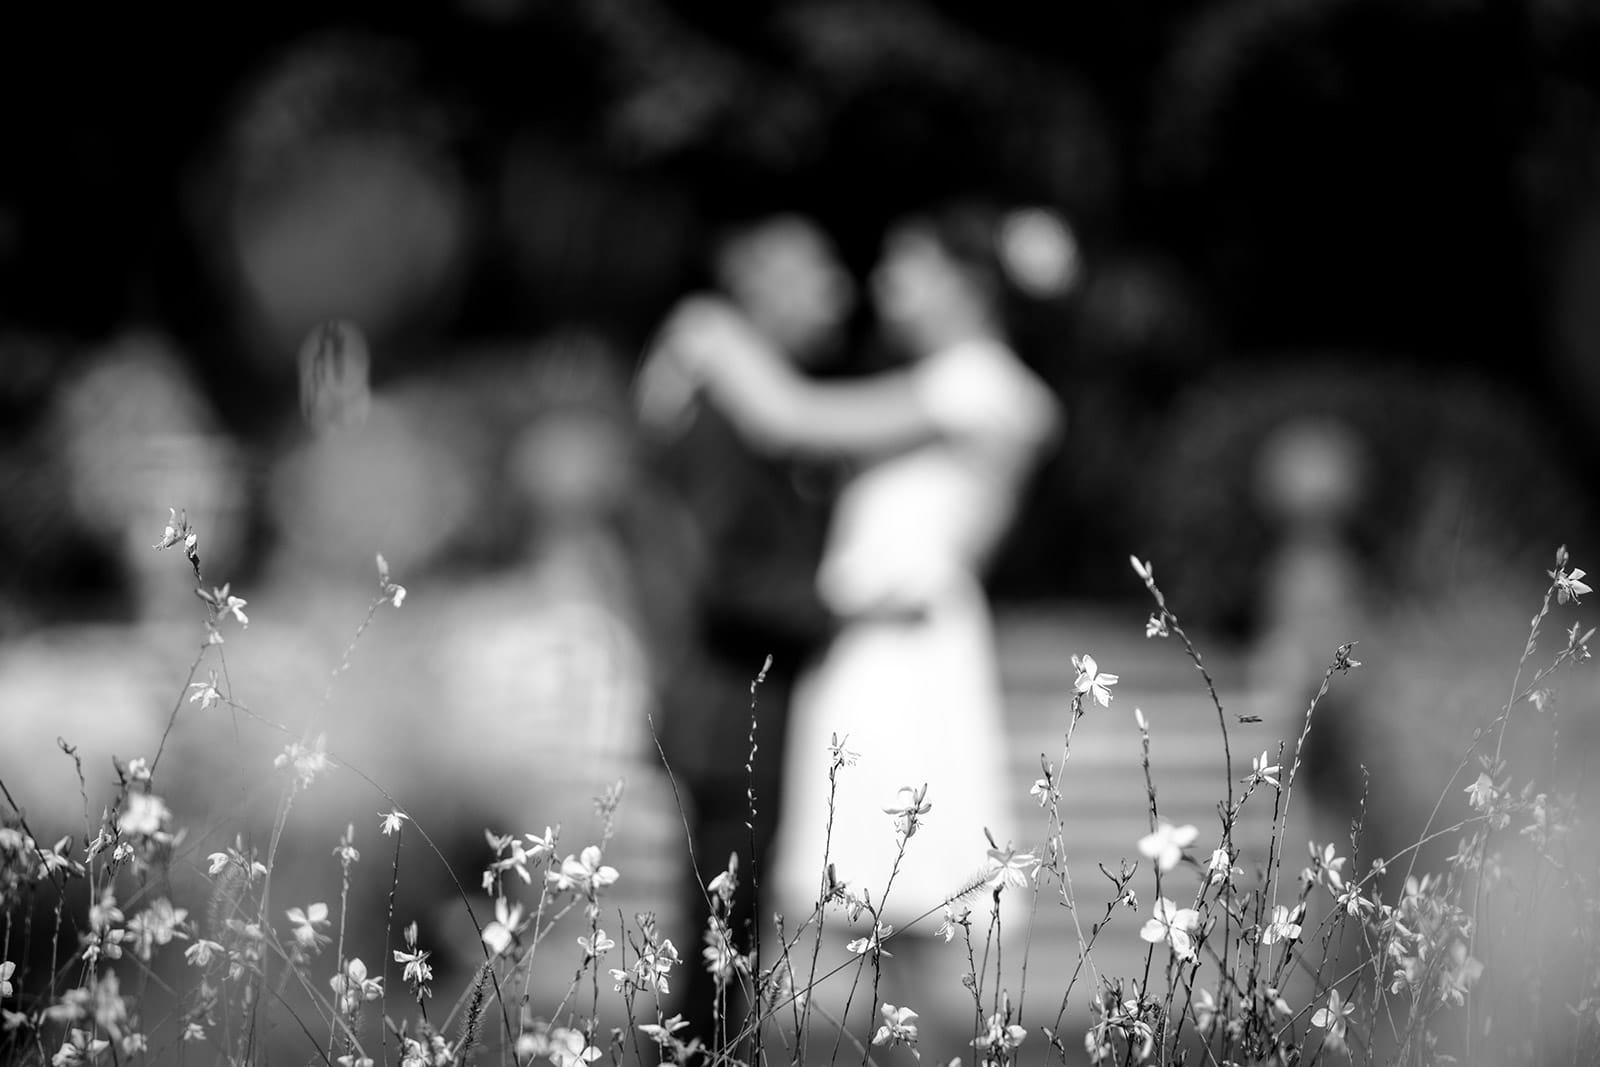  How to choose your wedding photographer 2018 2019 Best Wedding Photographer comment choisir son photographe de mariage 2018 2019 meilleur photographe de mariage Lyon Photographe mariage Lyon Photographe reportage mariage Lyon